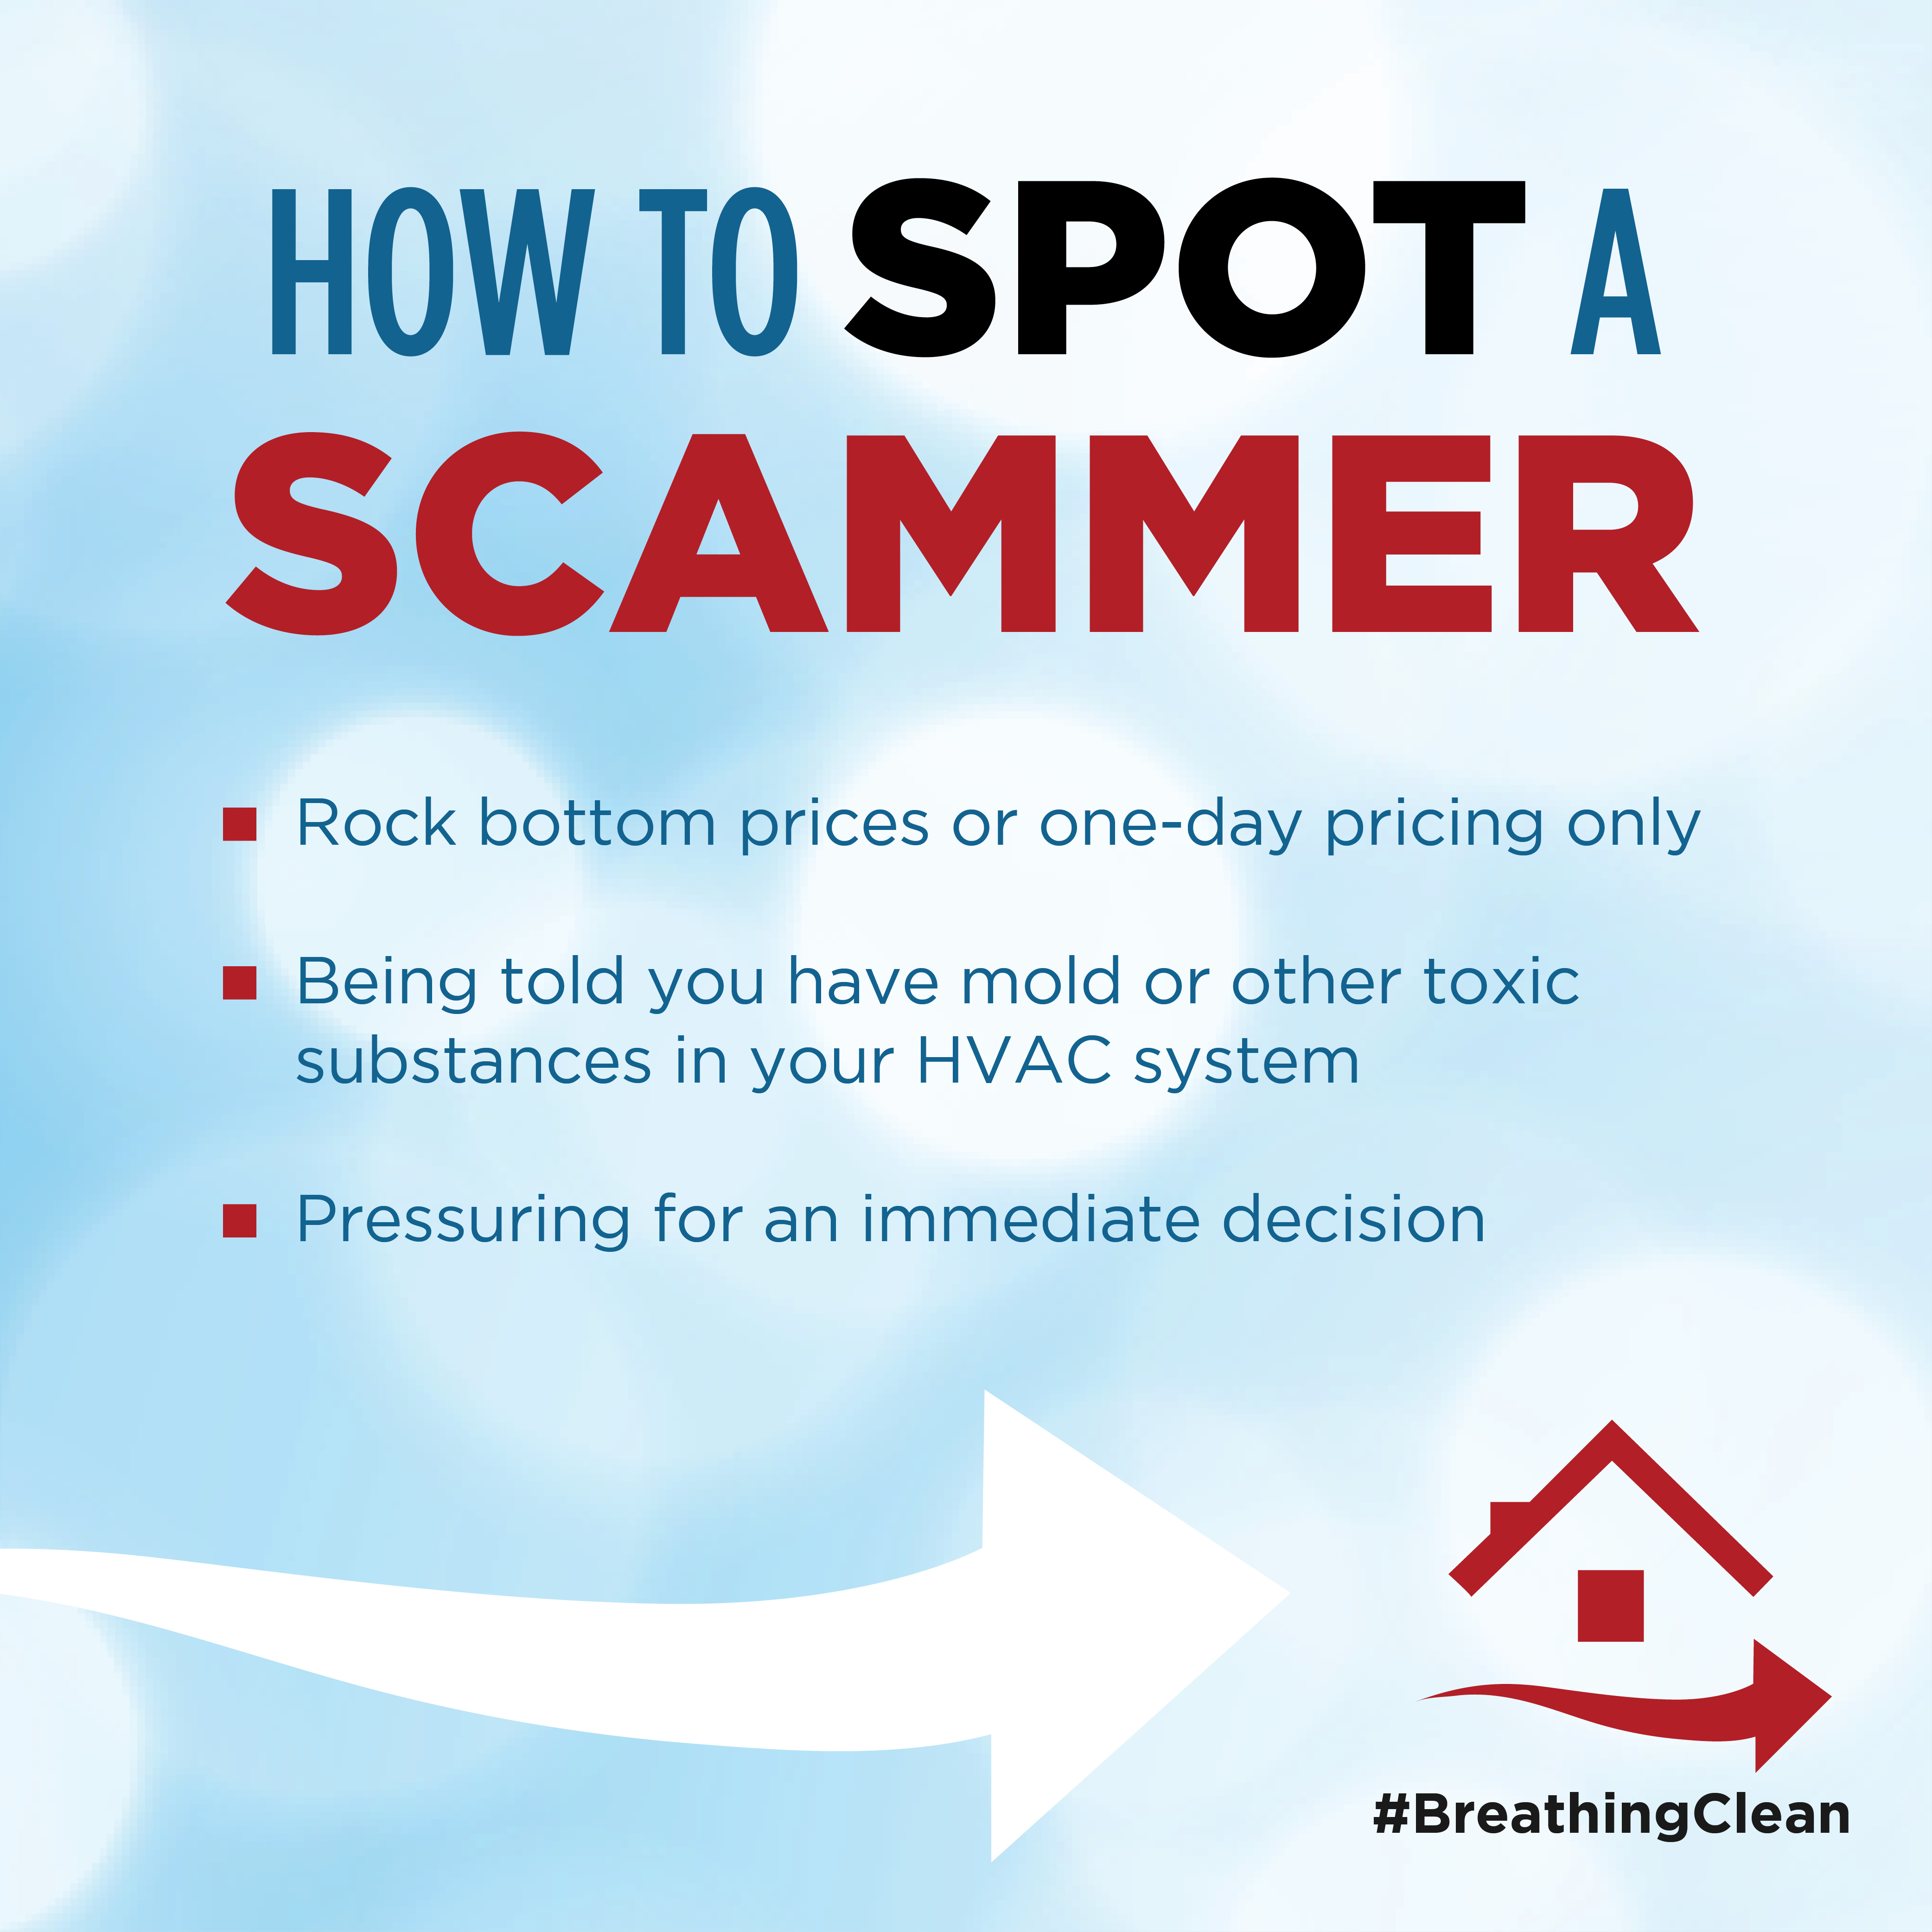 How to spot a scammer